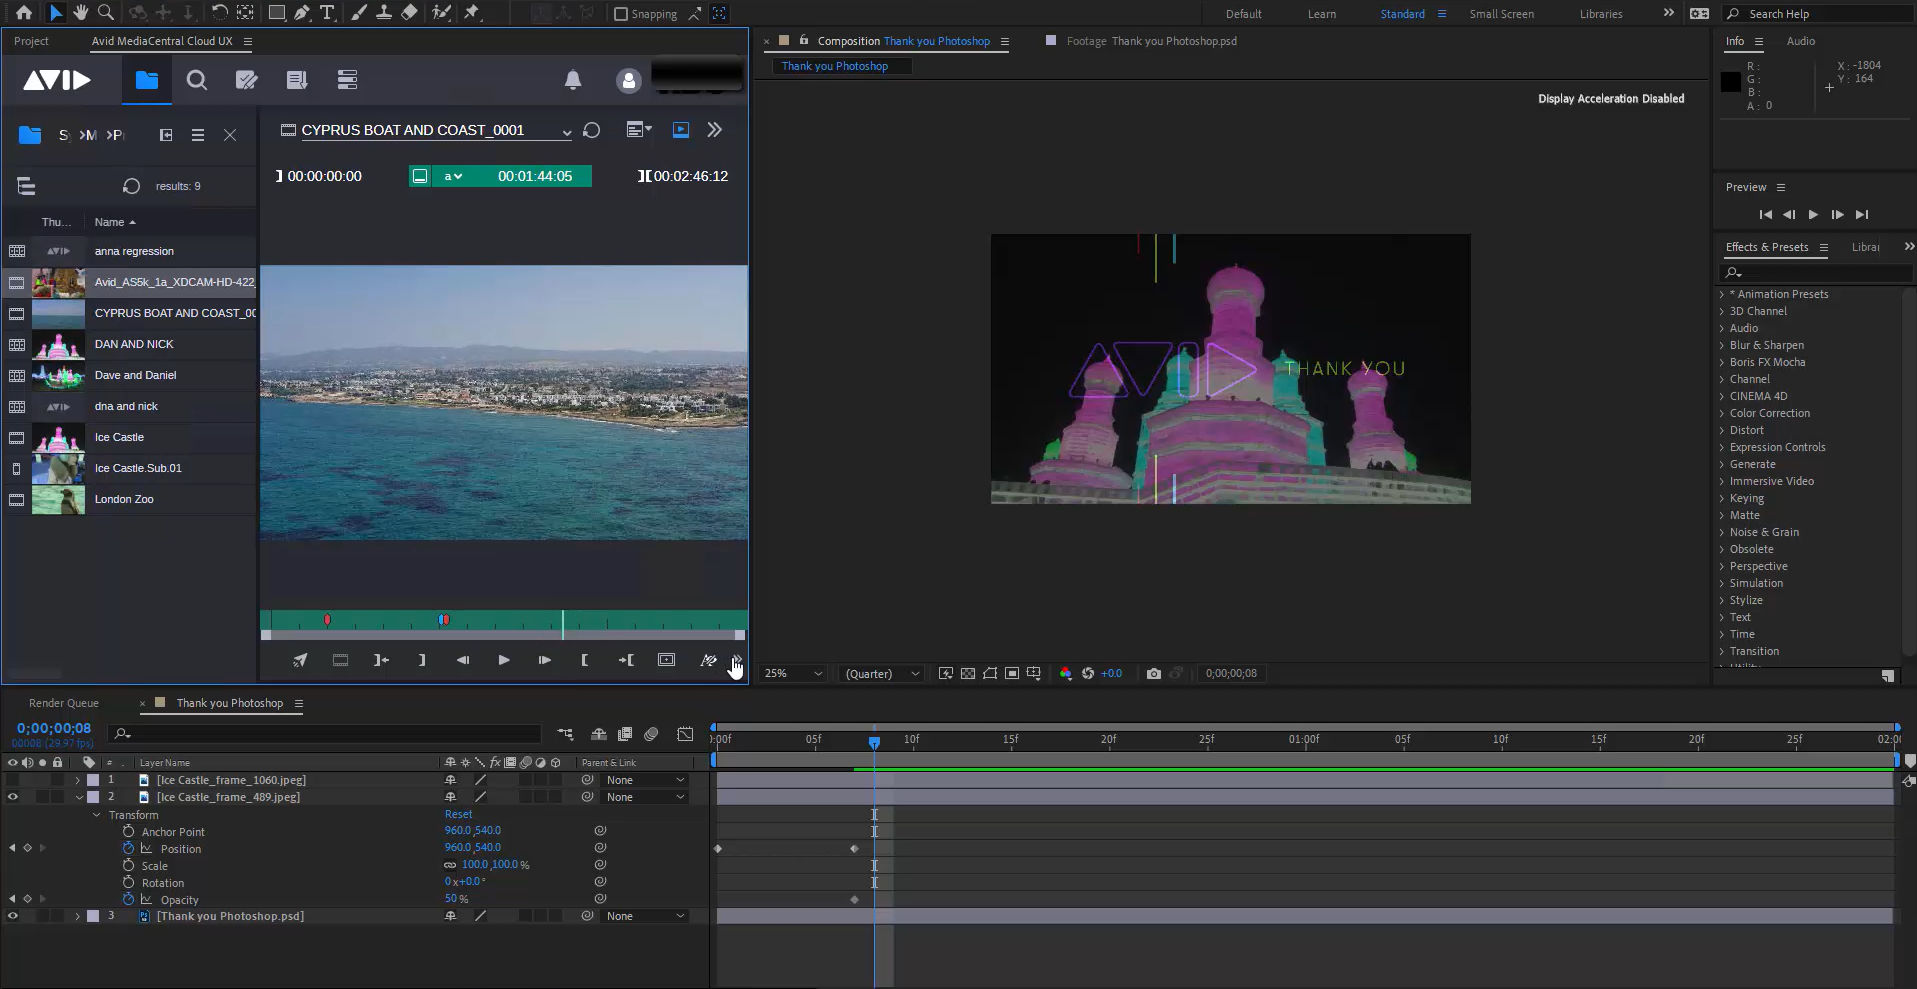 AVID MediaCentral support for Adobe Photoshop and After Effects